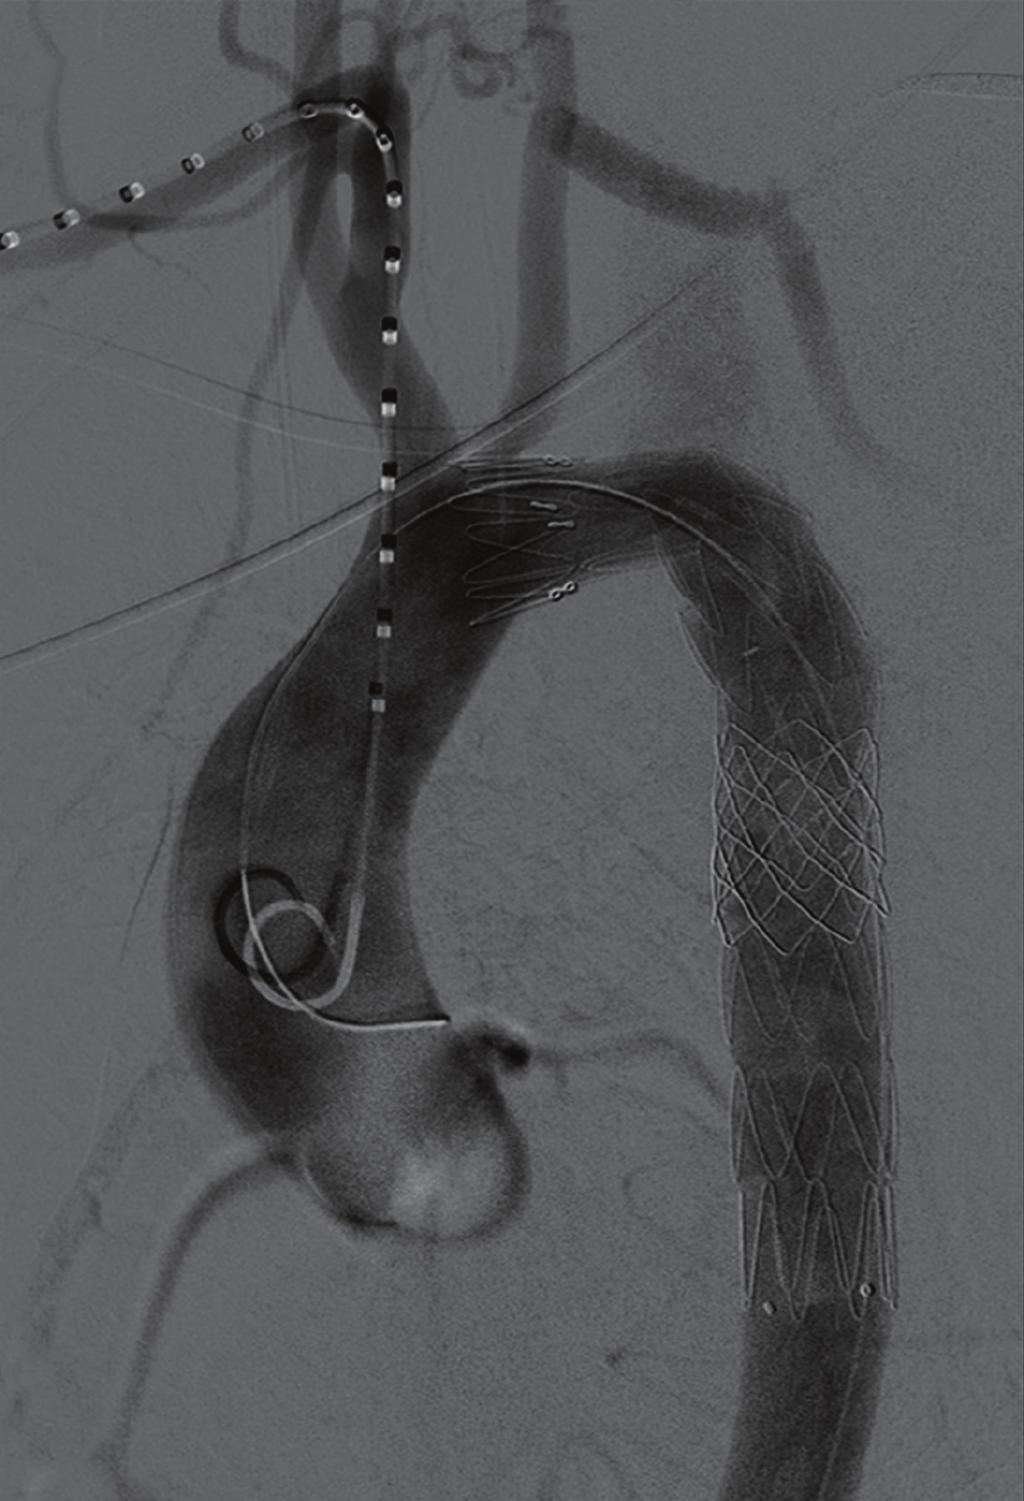 Final result after completion of the carotid subclavian bypass and exclusion of the pseudoaneurysm. A heparin-related leak can be found which extends to the left subclavian artery.